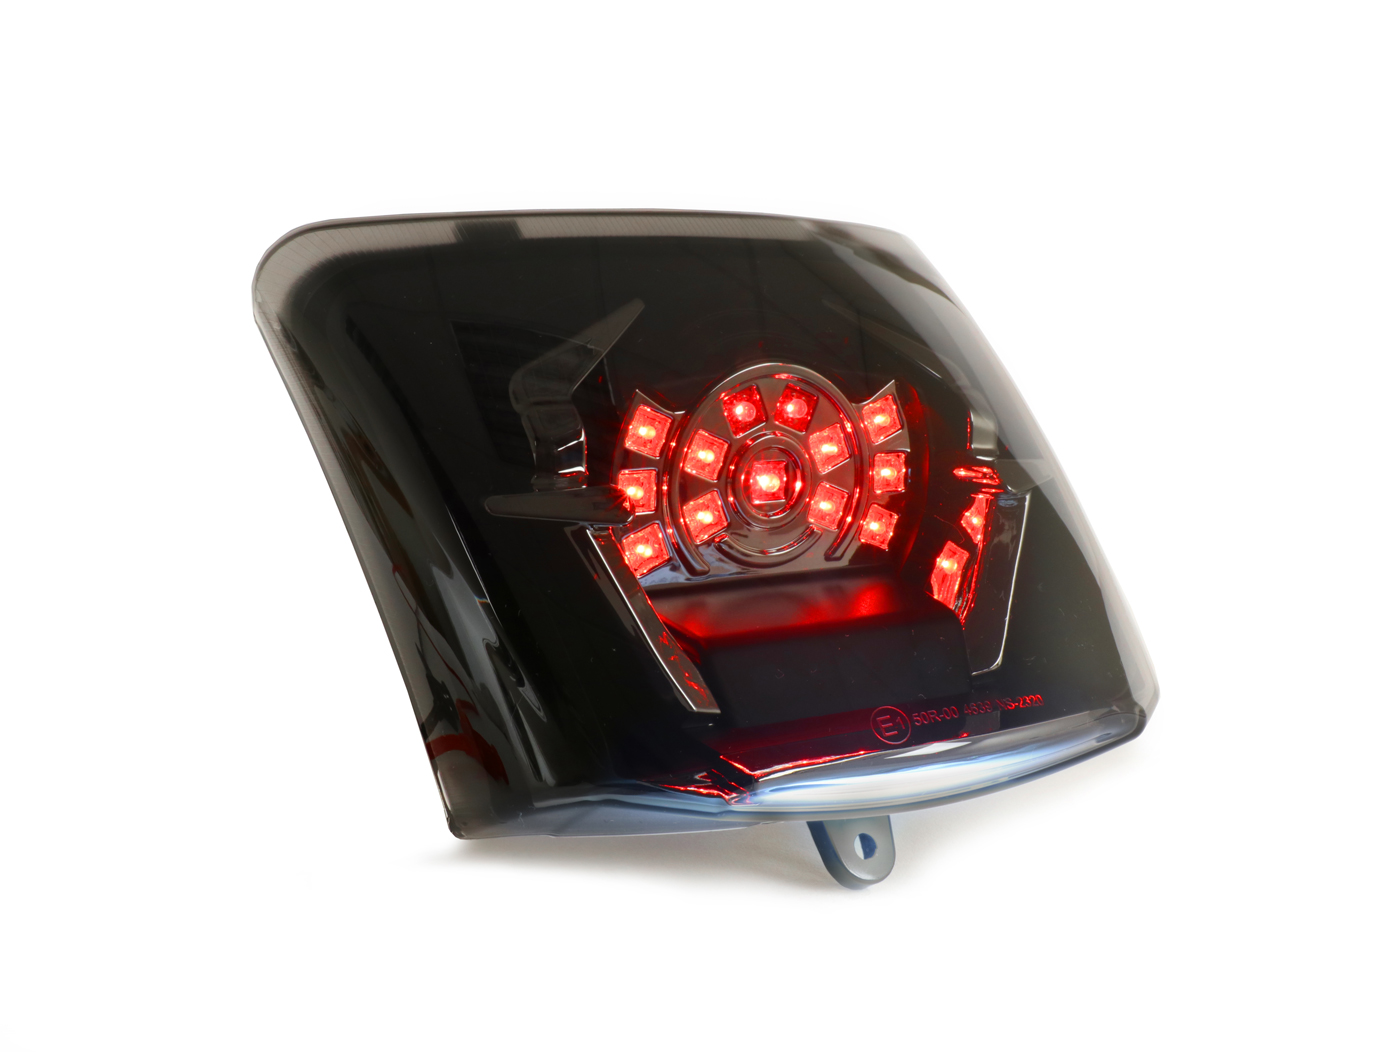 Vespa OEM Rear Light Assembly for Vespa GTS Tail Light for Vespa GTS Super Brake Light for Vespa GTV 125-300cc Made From 2014 Bulbs Included 1D000570 1D000516 